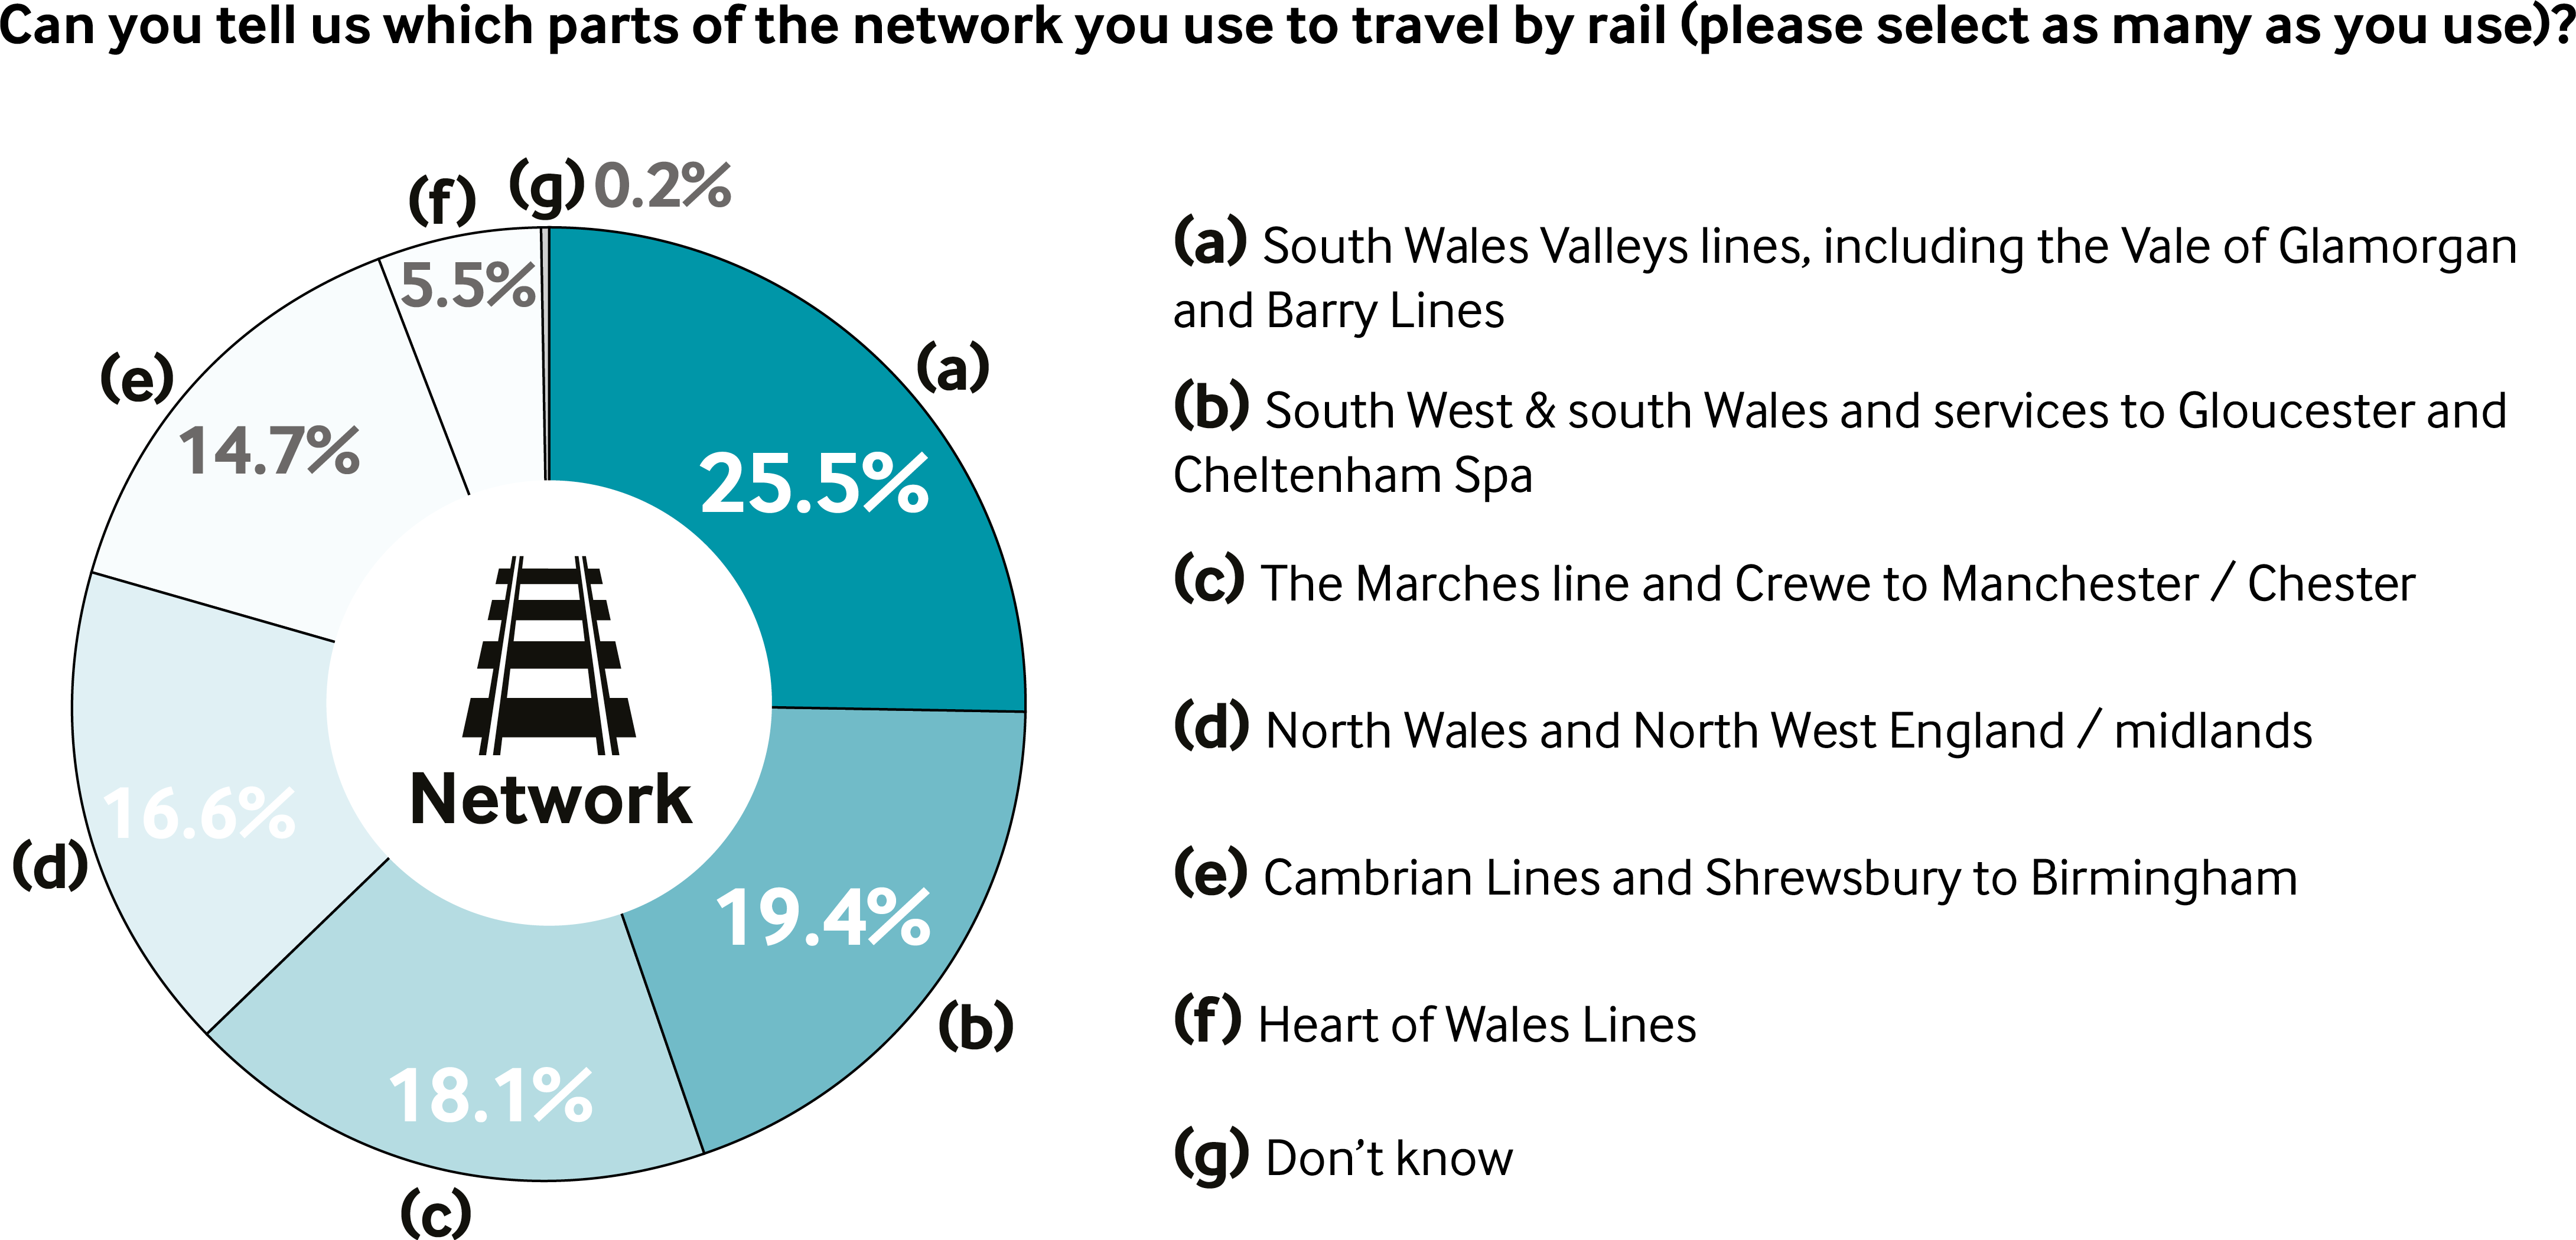 Economy Infrastructure and Skills Committee rail passenger survey results